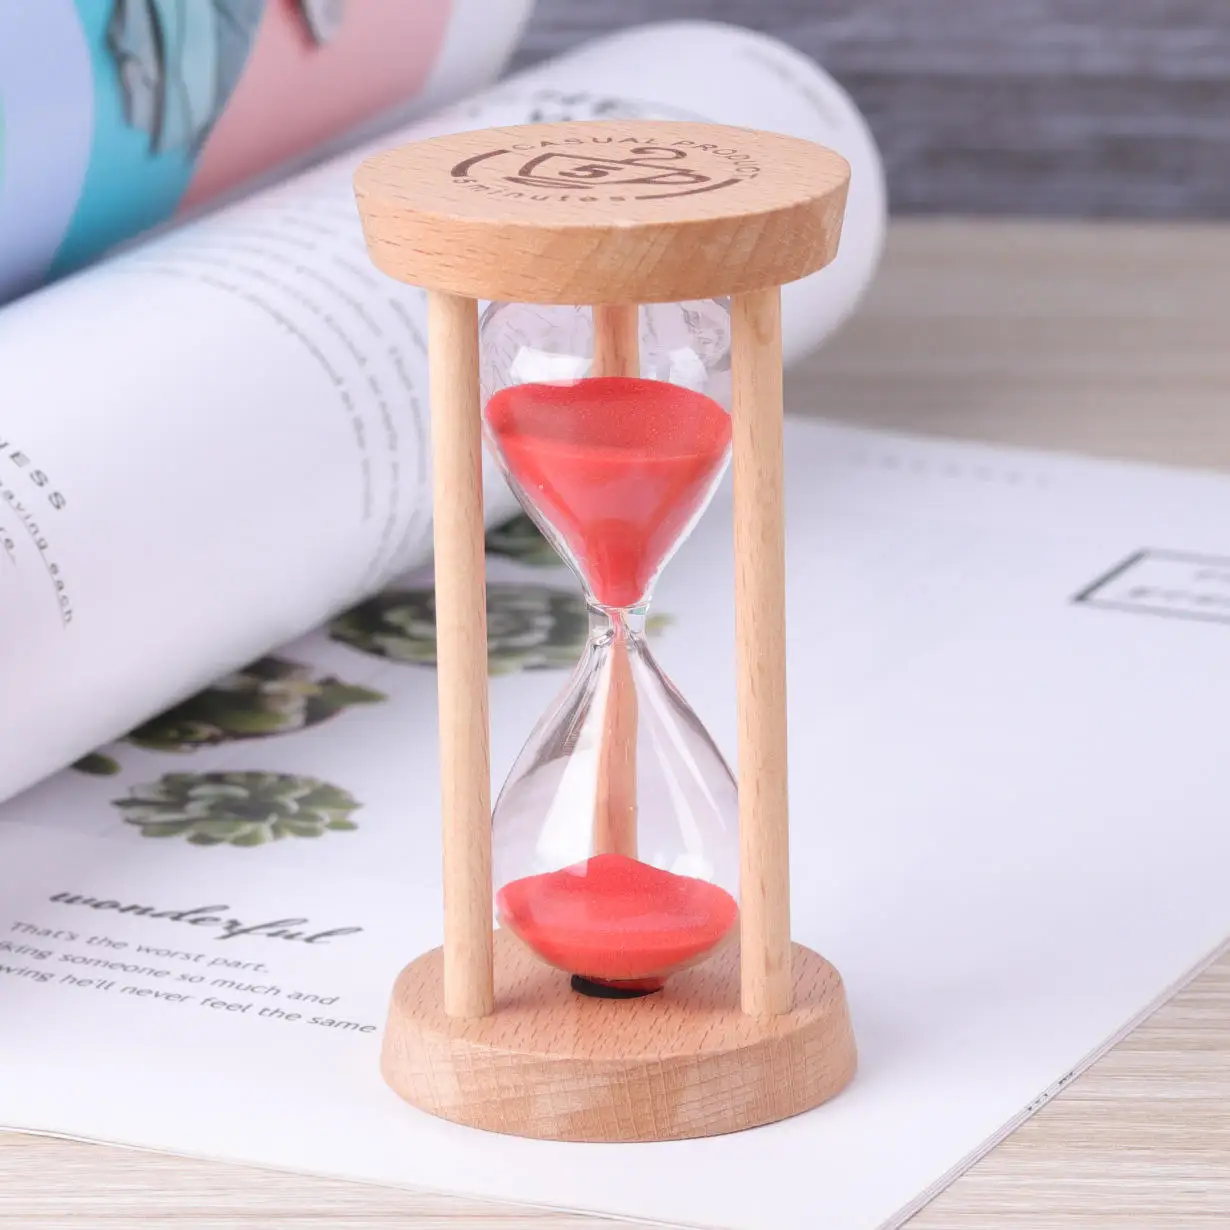 Buy 5-minute Toilet Hourglass Sand Timer for Men and Women Online